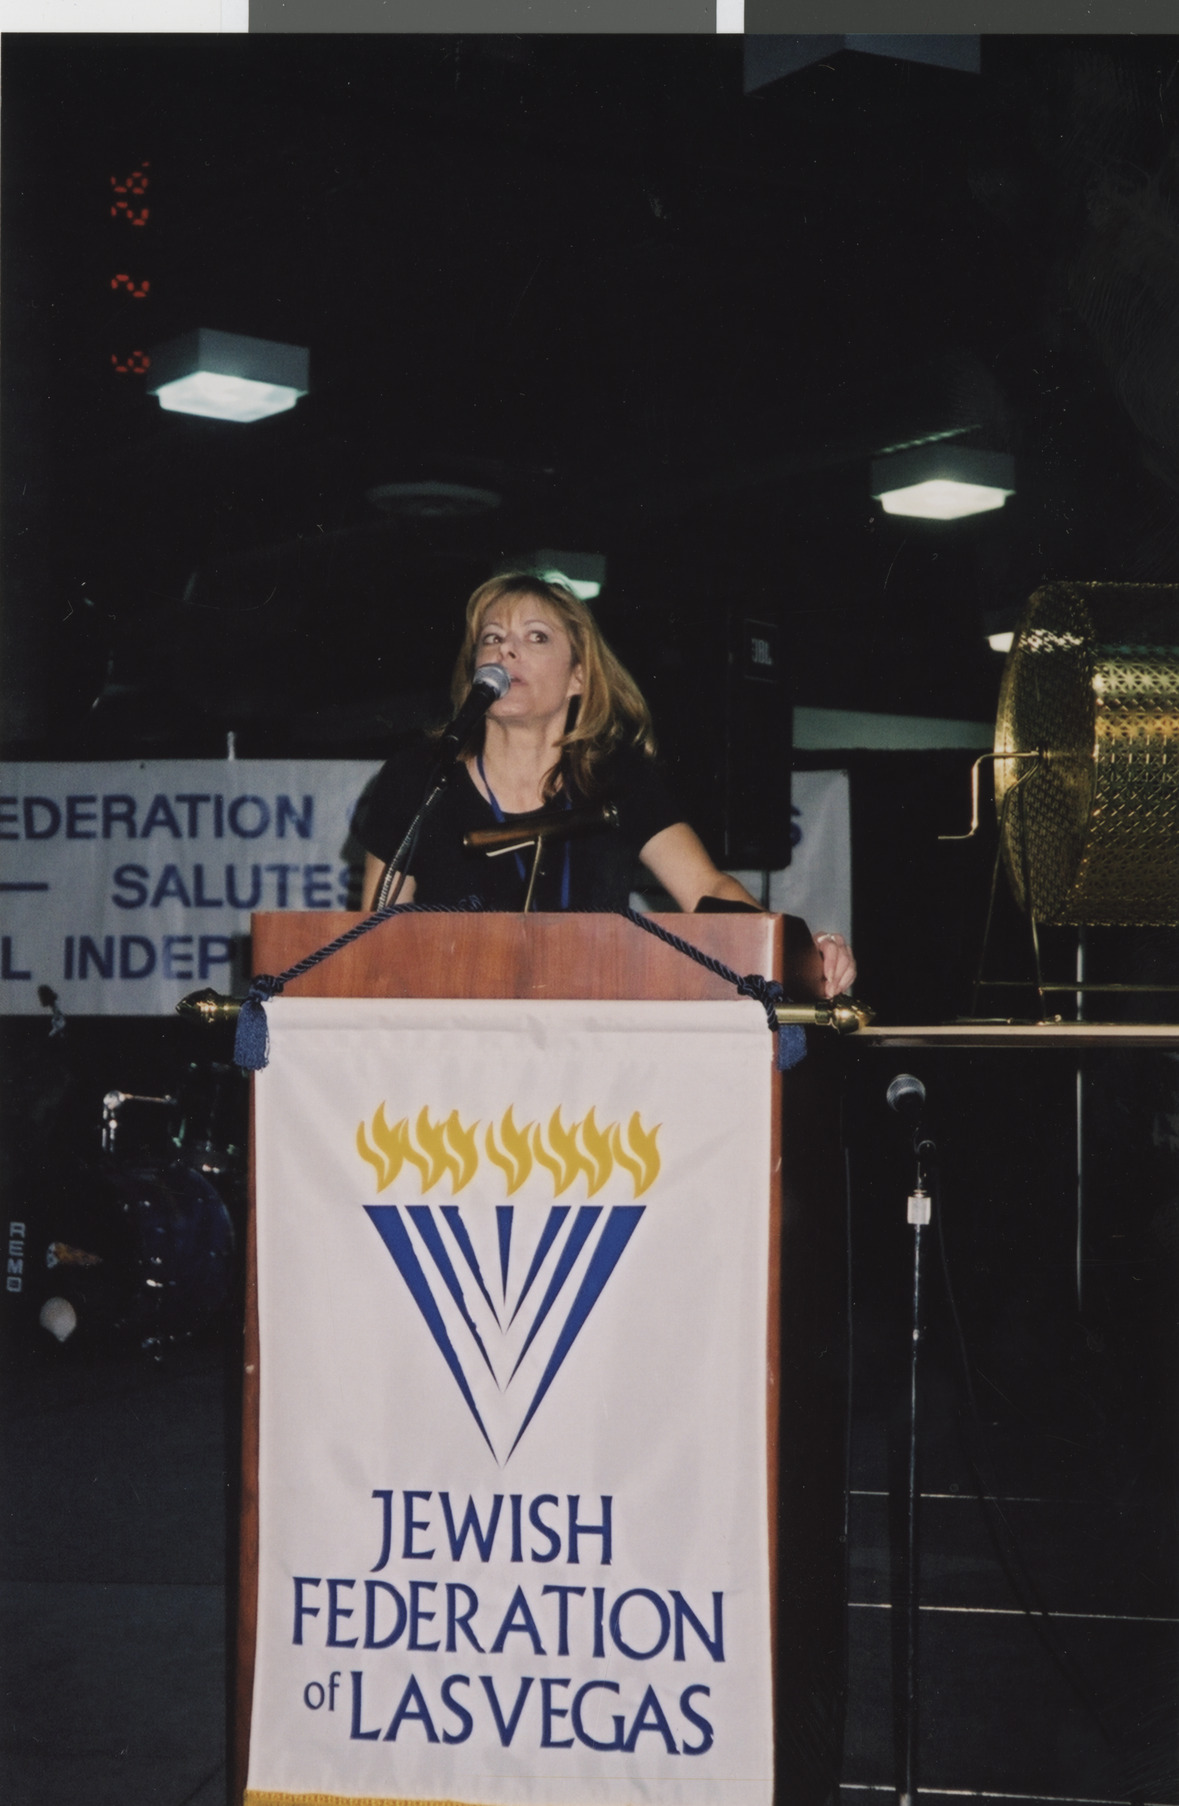 Photograph of Israel Independence Day Celebrations, undated